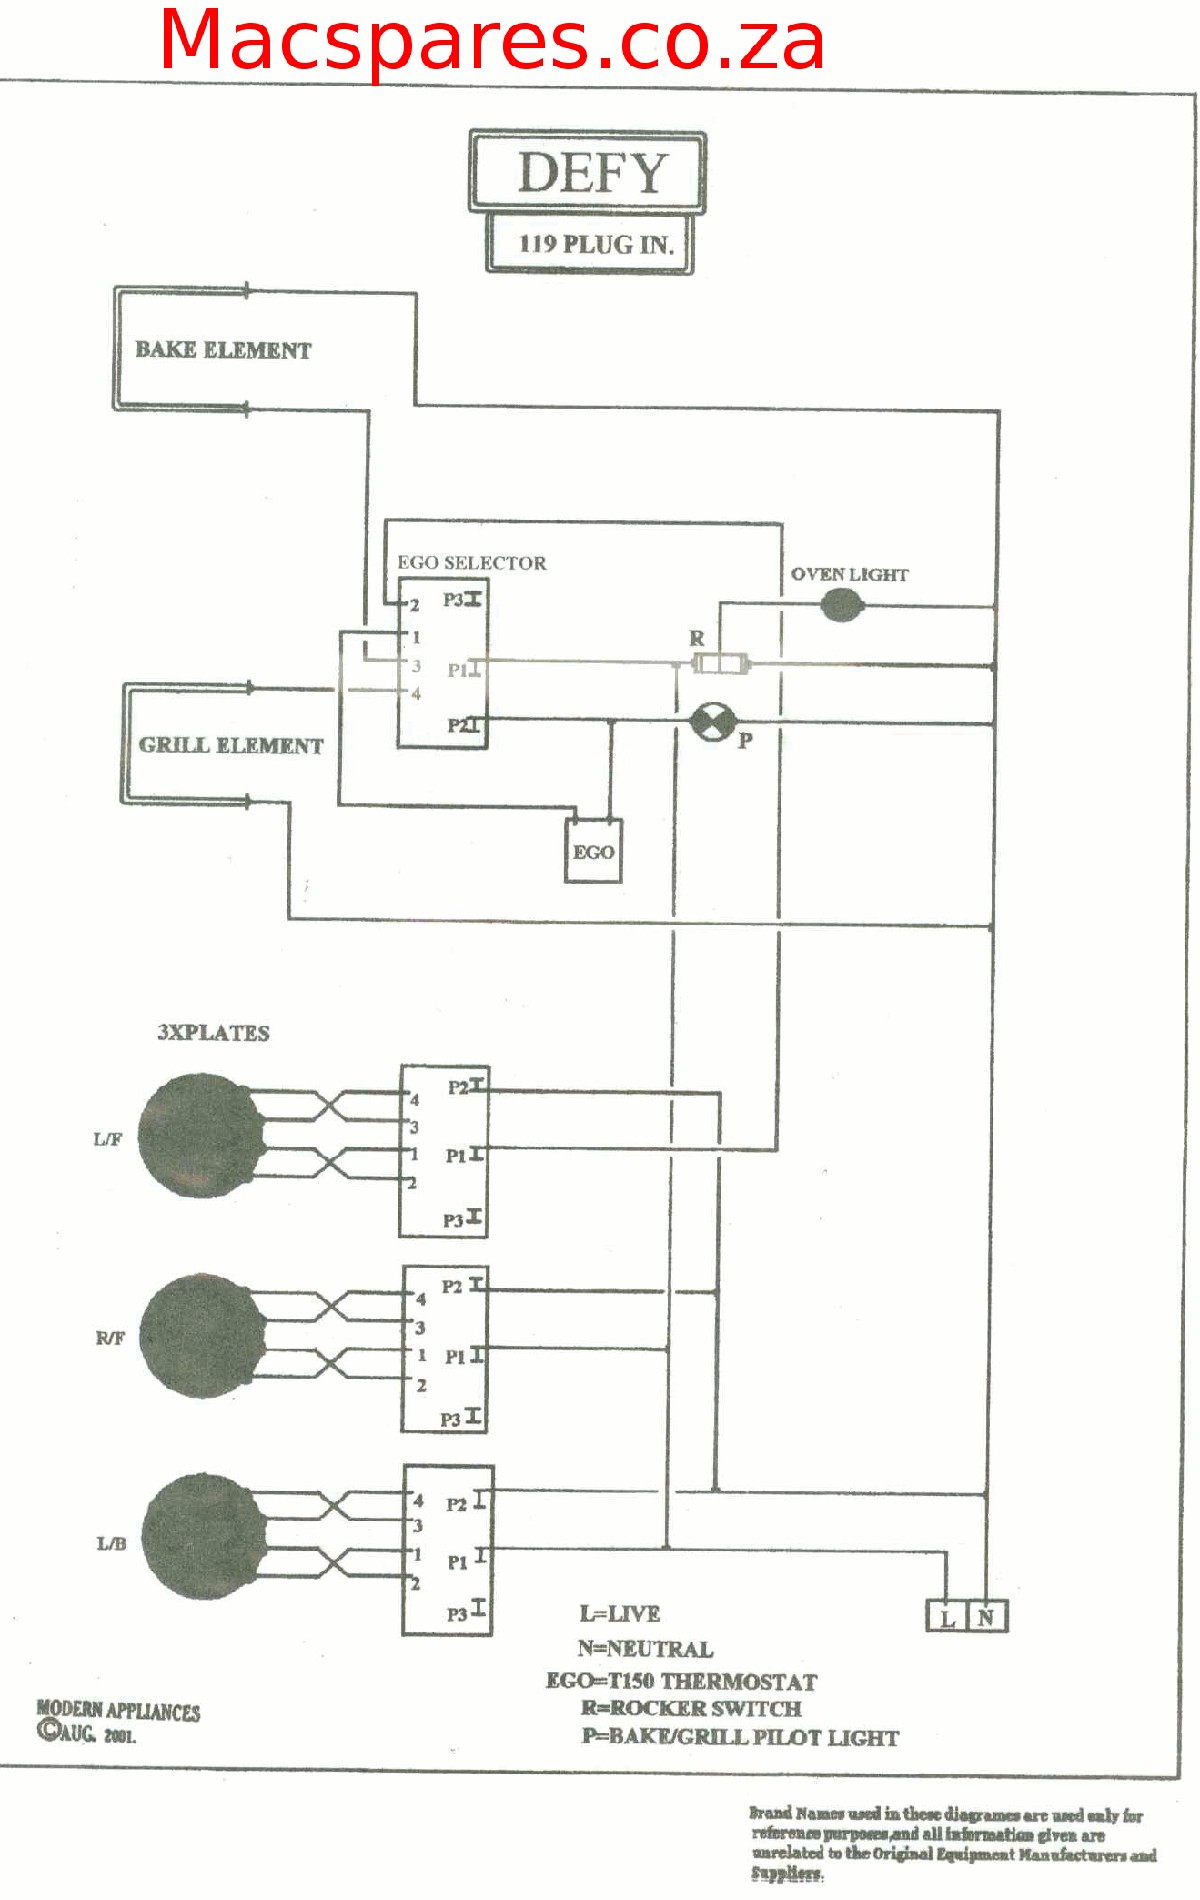 Heat Trace Wiring Diagram Wiring Diagrams Stoves Macspares Of Heat Trace Wiring Diagram